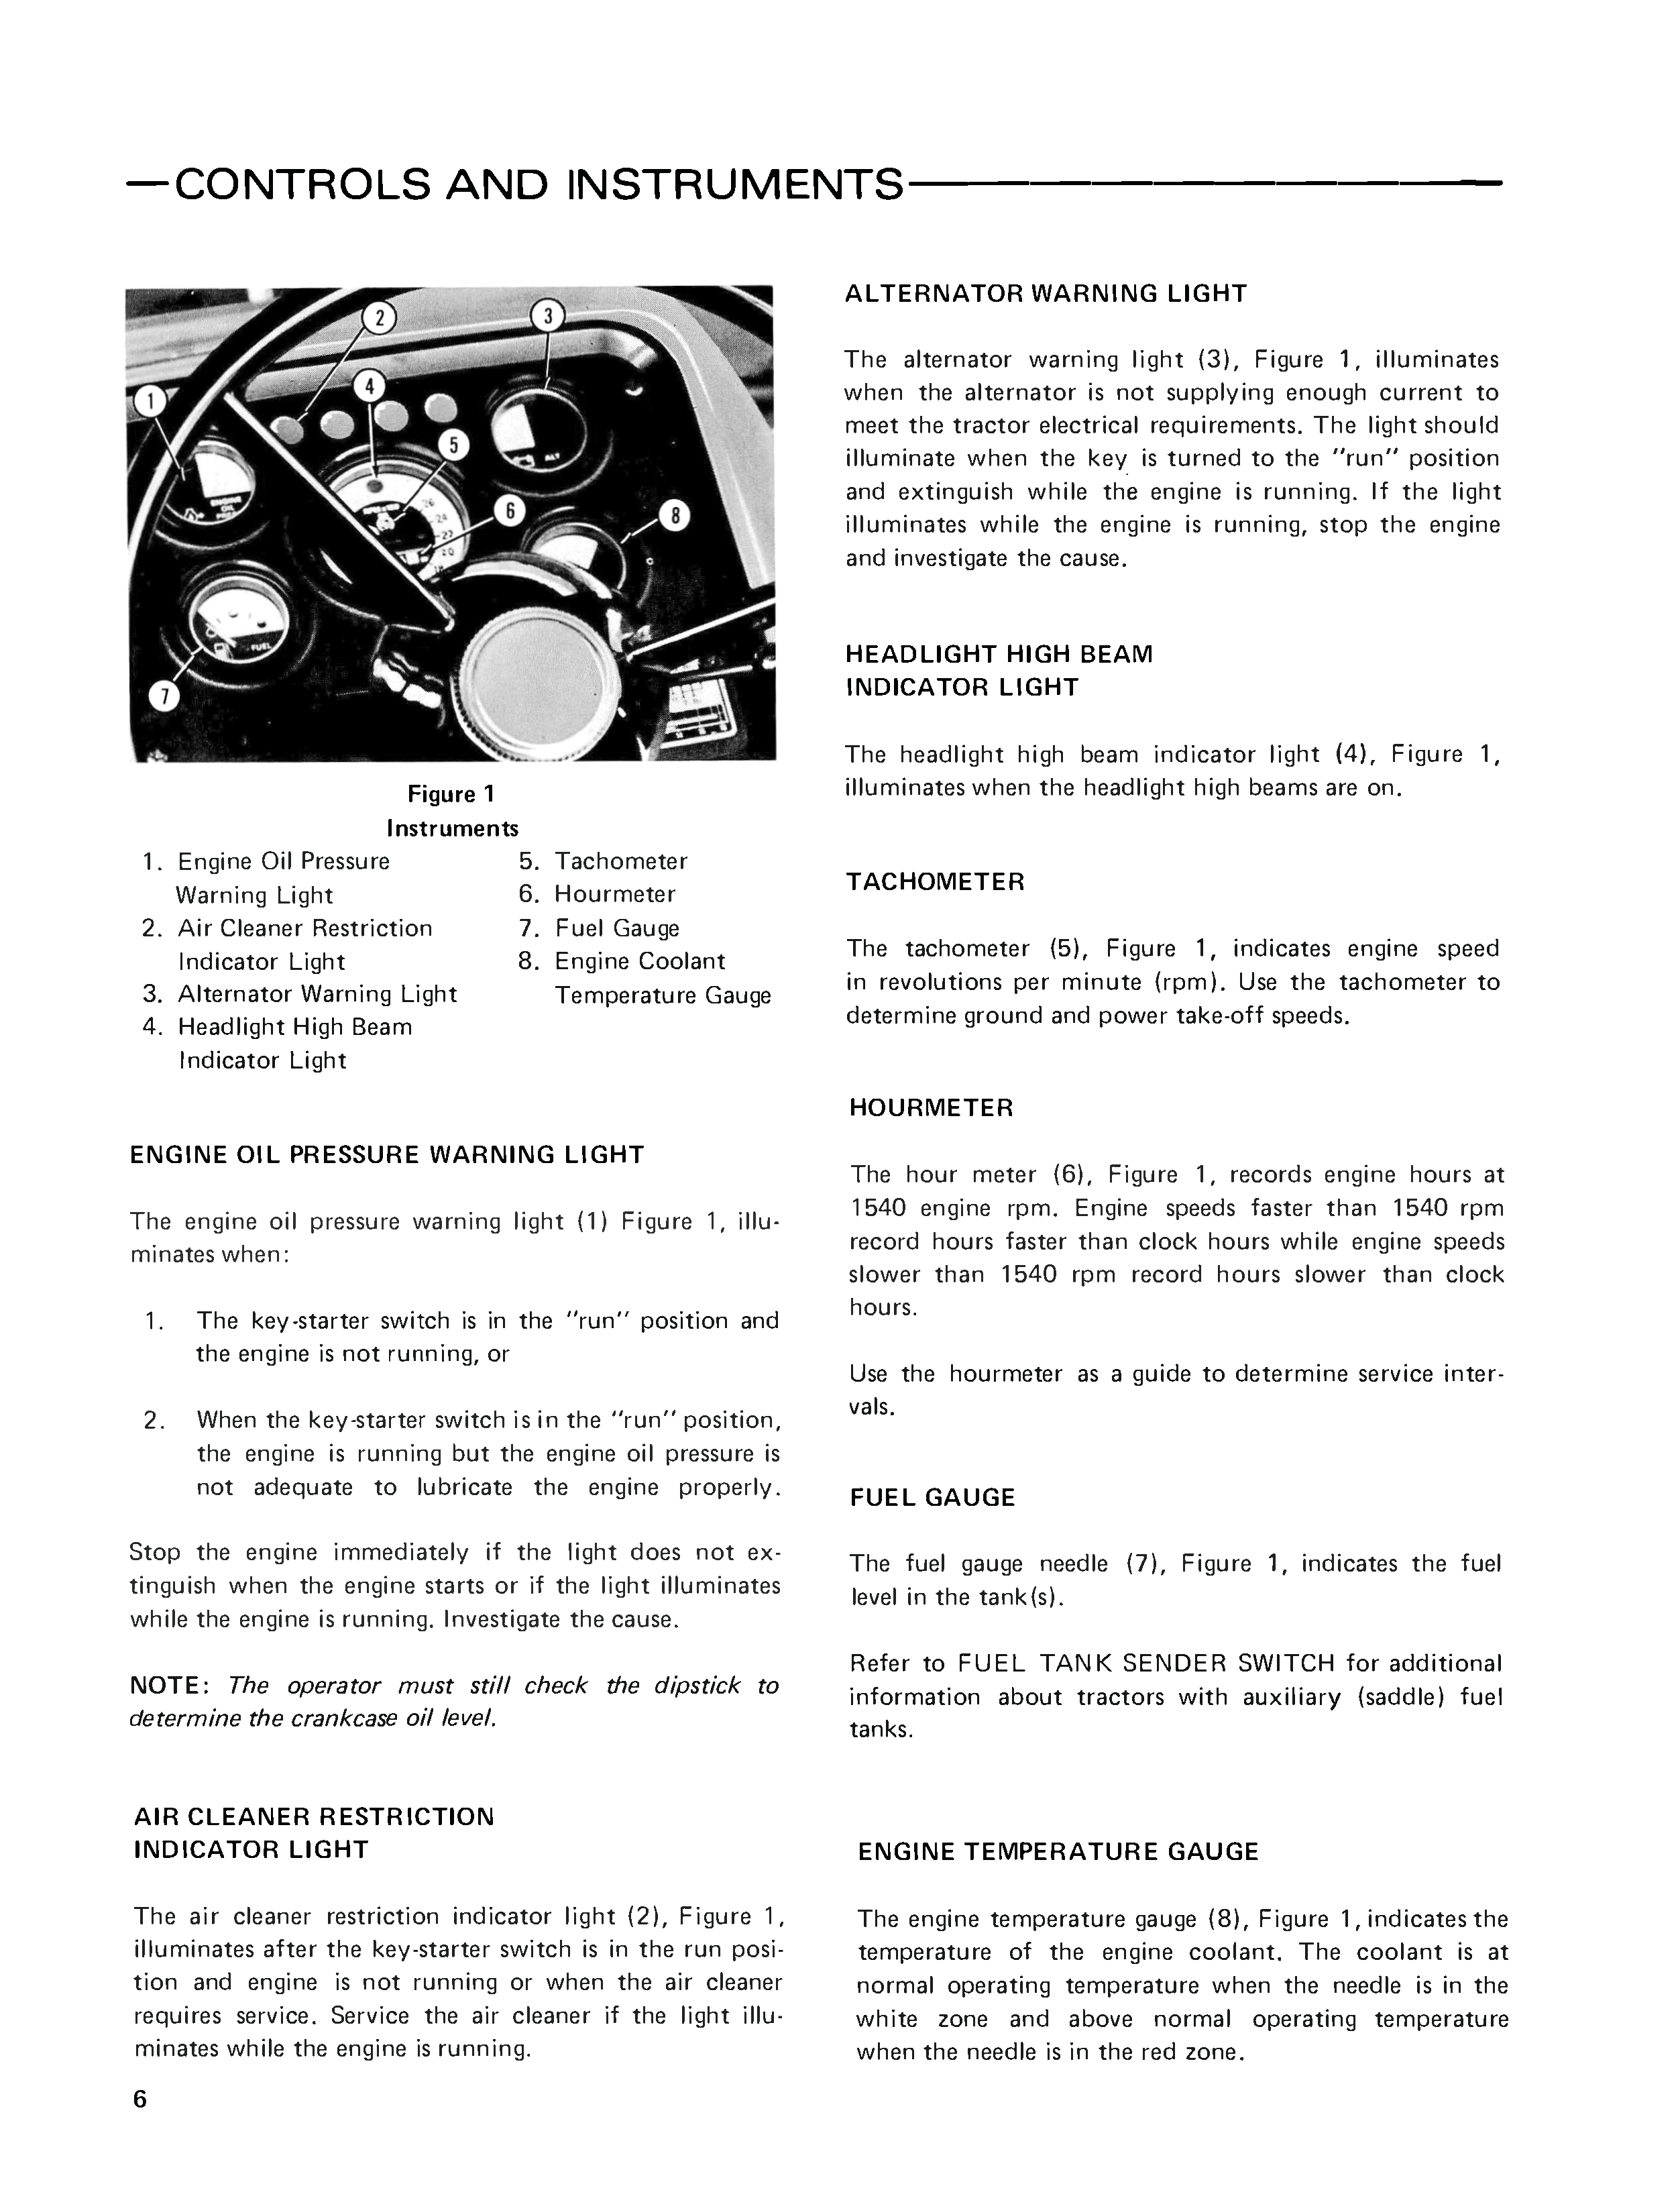 Ford 6700 - 7700 Tractors Operator's Manual